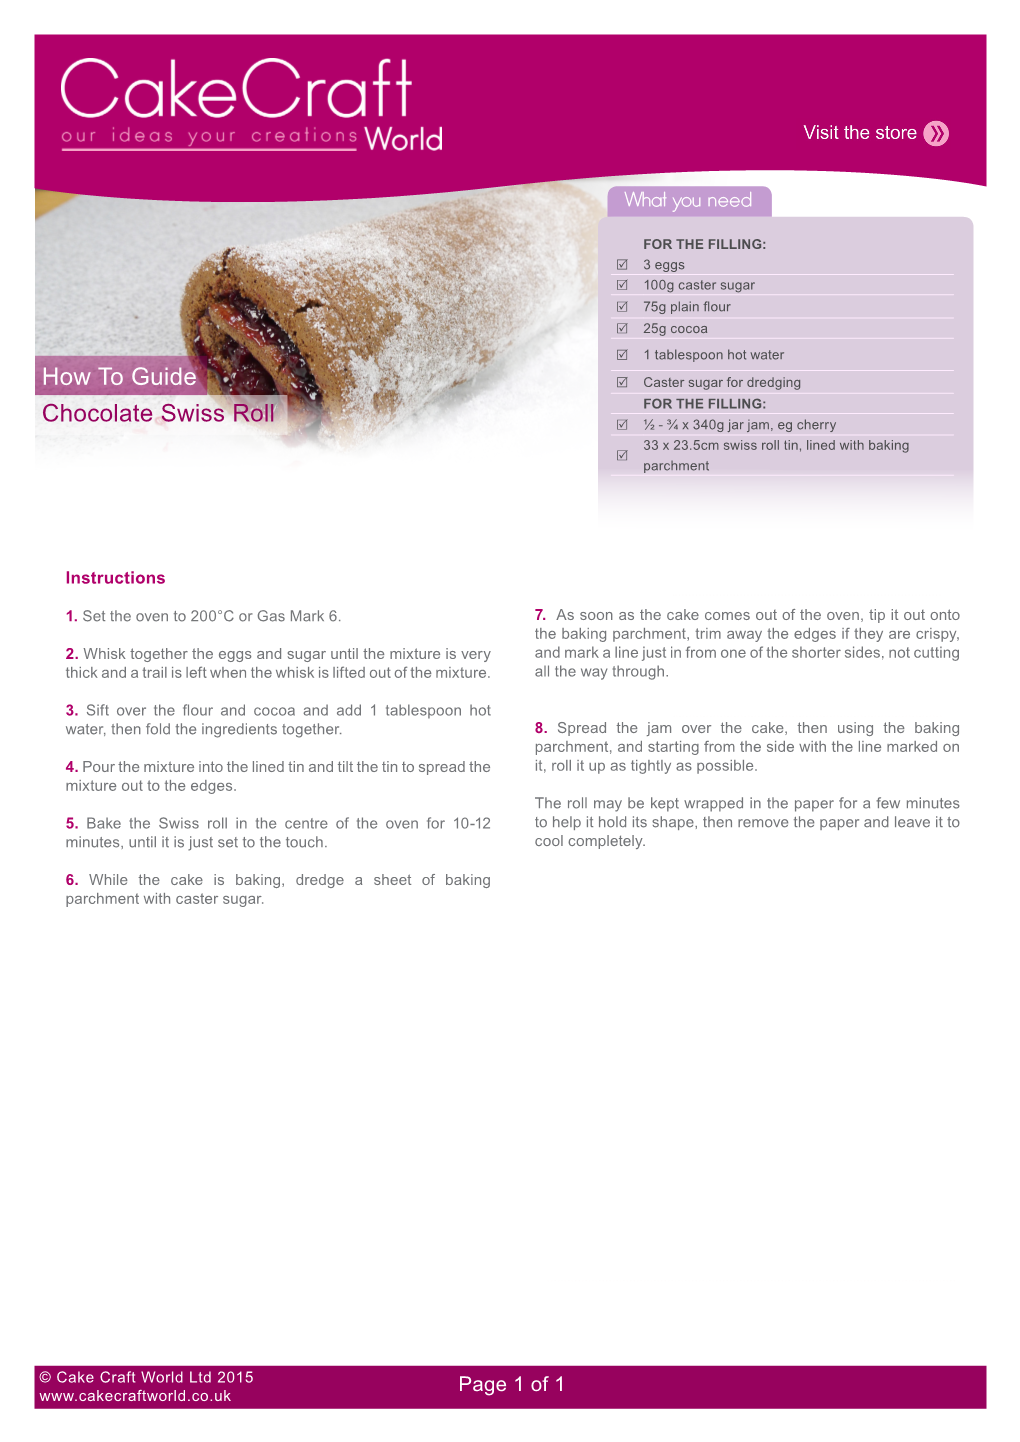 How to Guide Chocolate Swiss Roll